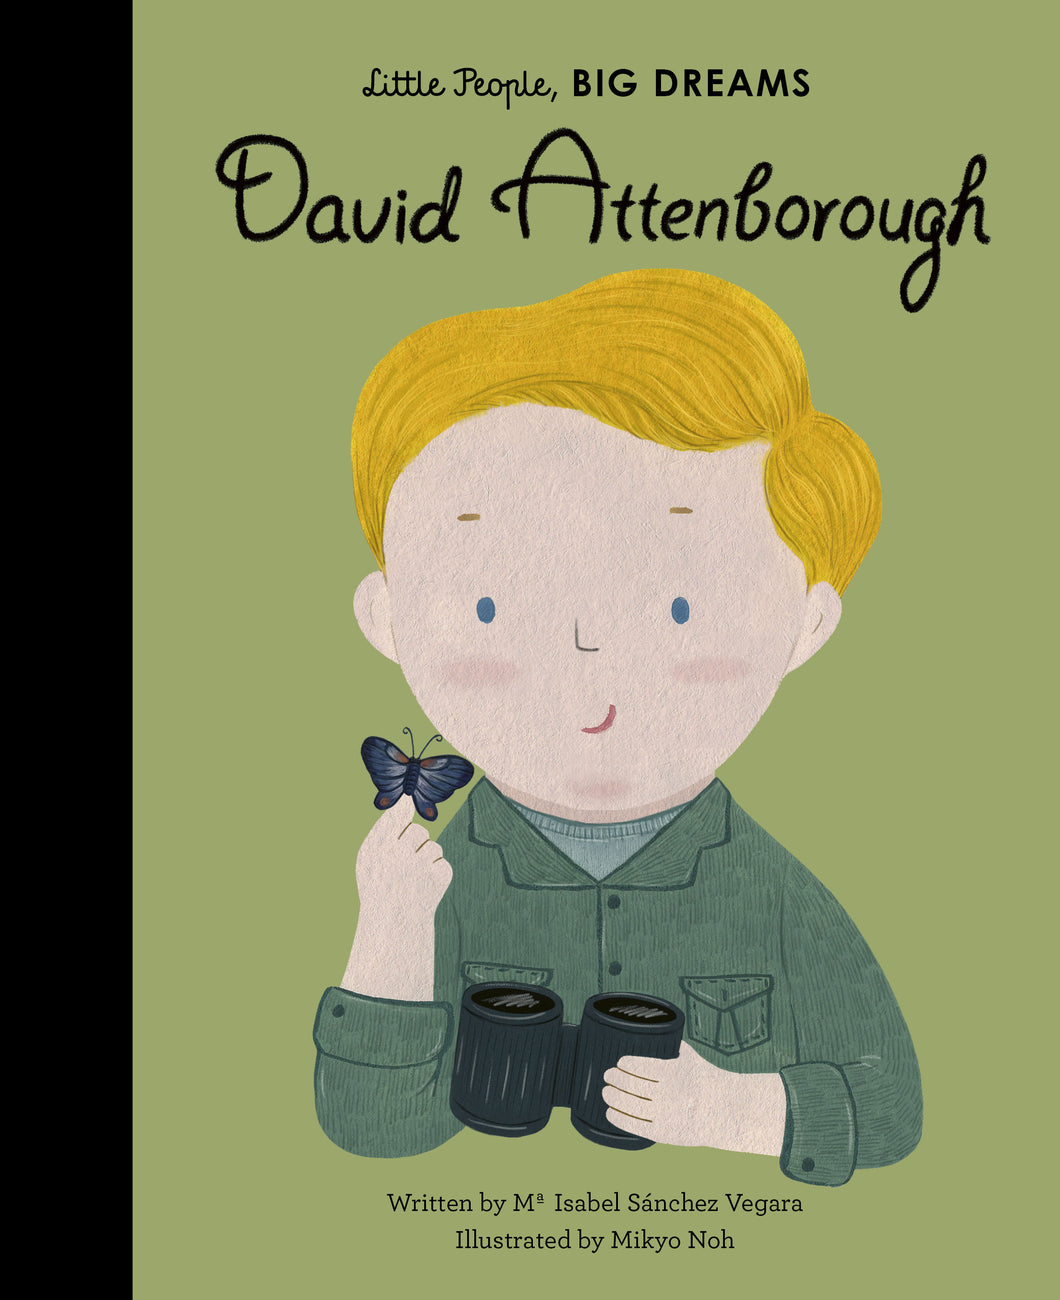 Book cover is green with illustration of David Attenborough (a white man) with a butterfly on his finger and binoculars in his left hand.